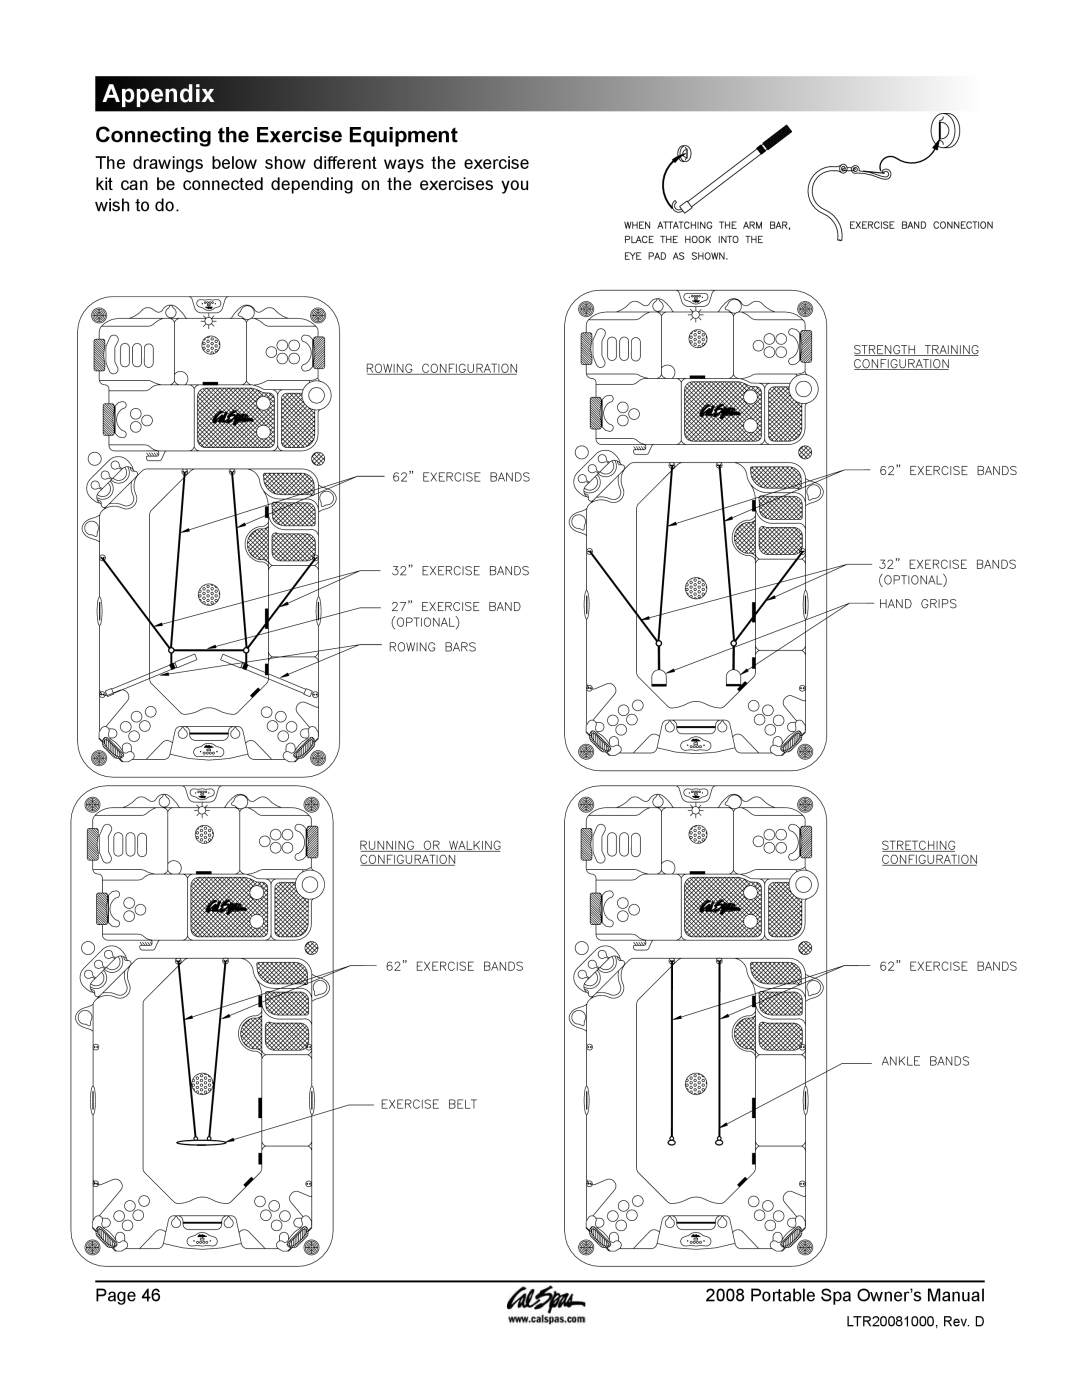 Cal Spas GFCI manual Connecting the Exercise Equipment, Appendix, Page, Portable Spa Owner’s Manual 